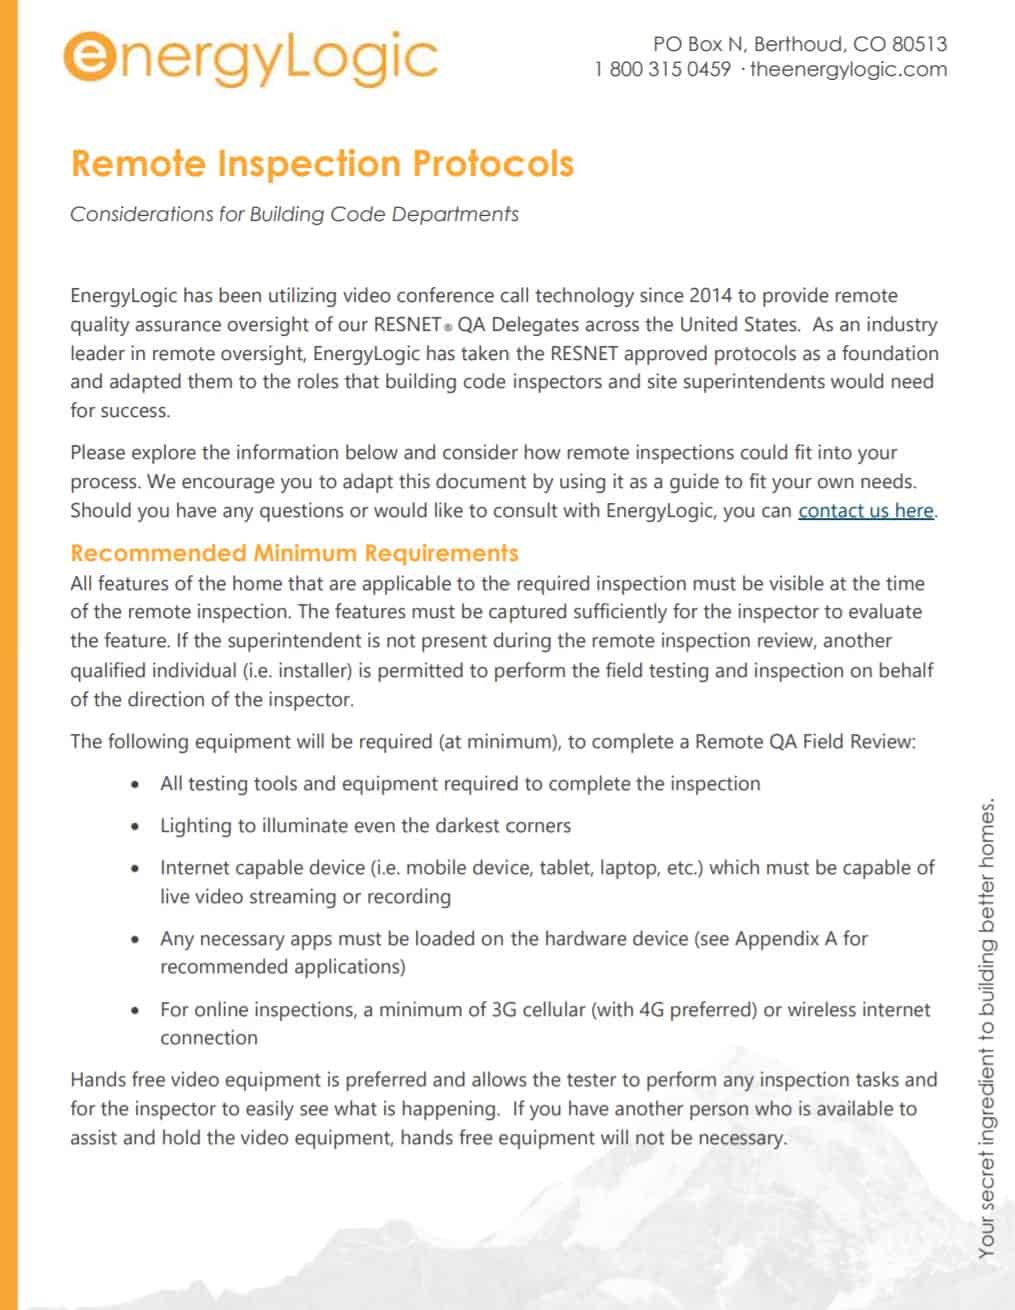 Remote Inspection Protocols - preview image